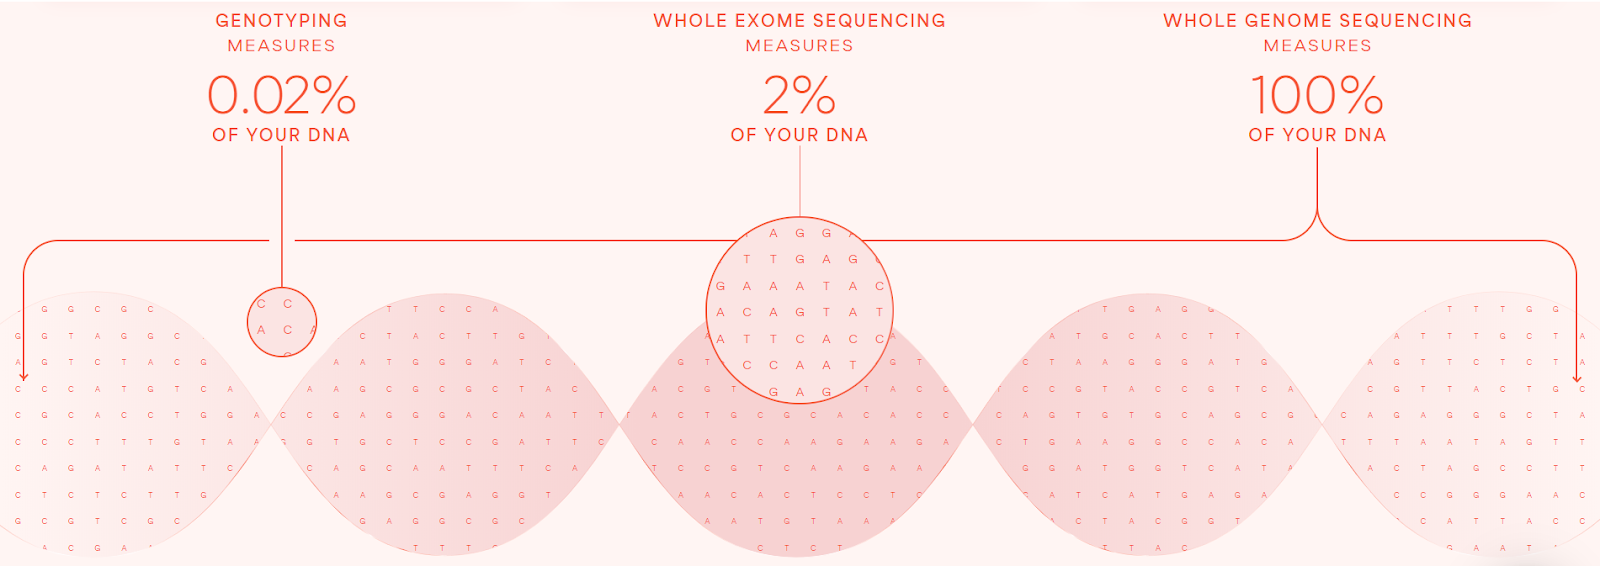 Diagram depicting the percent of your DNA measured by gentotyping, Whole exome sequencing, and Whole genome sequencing at Sano Genetics